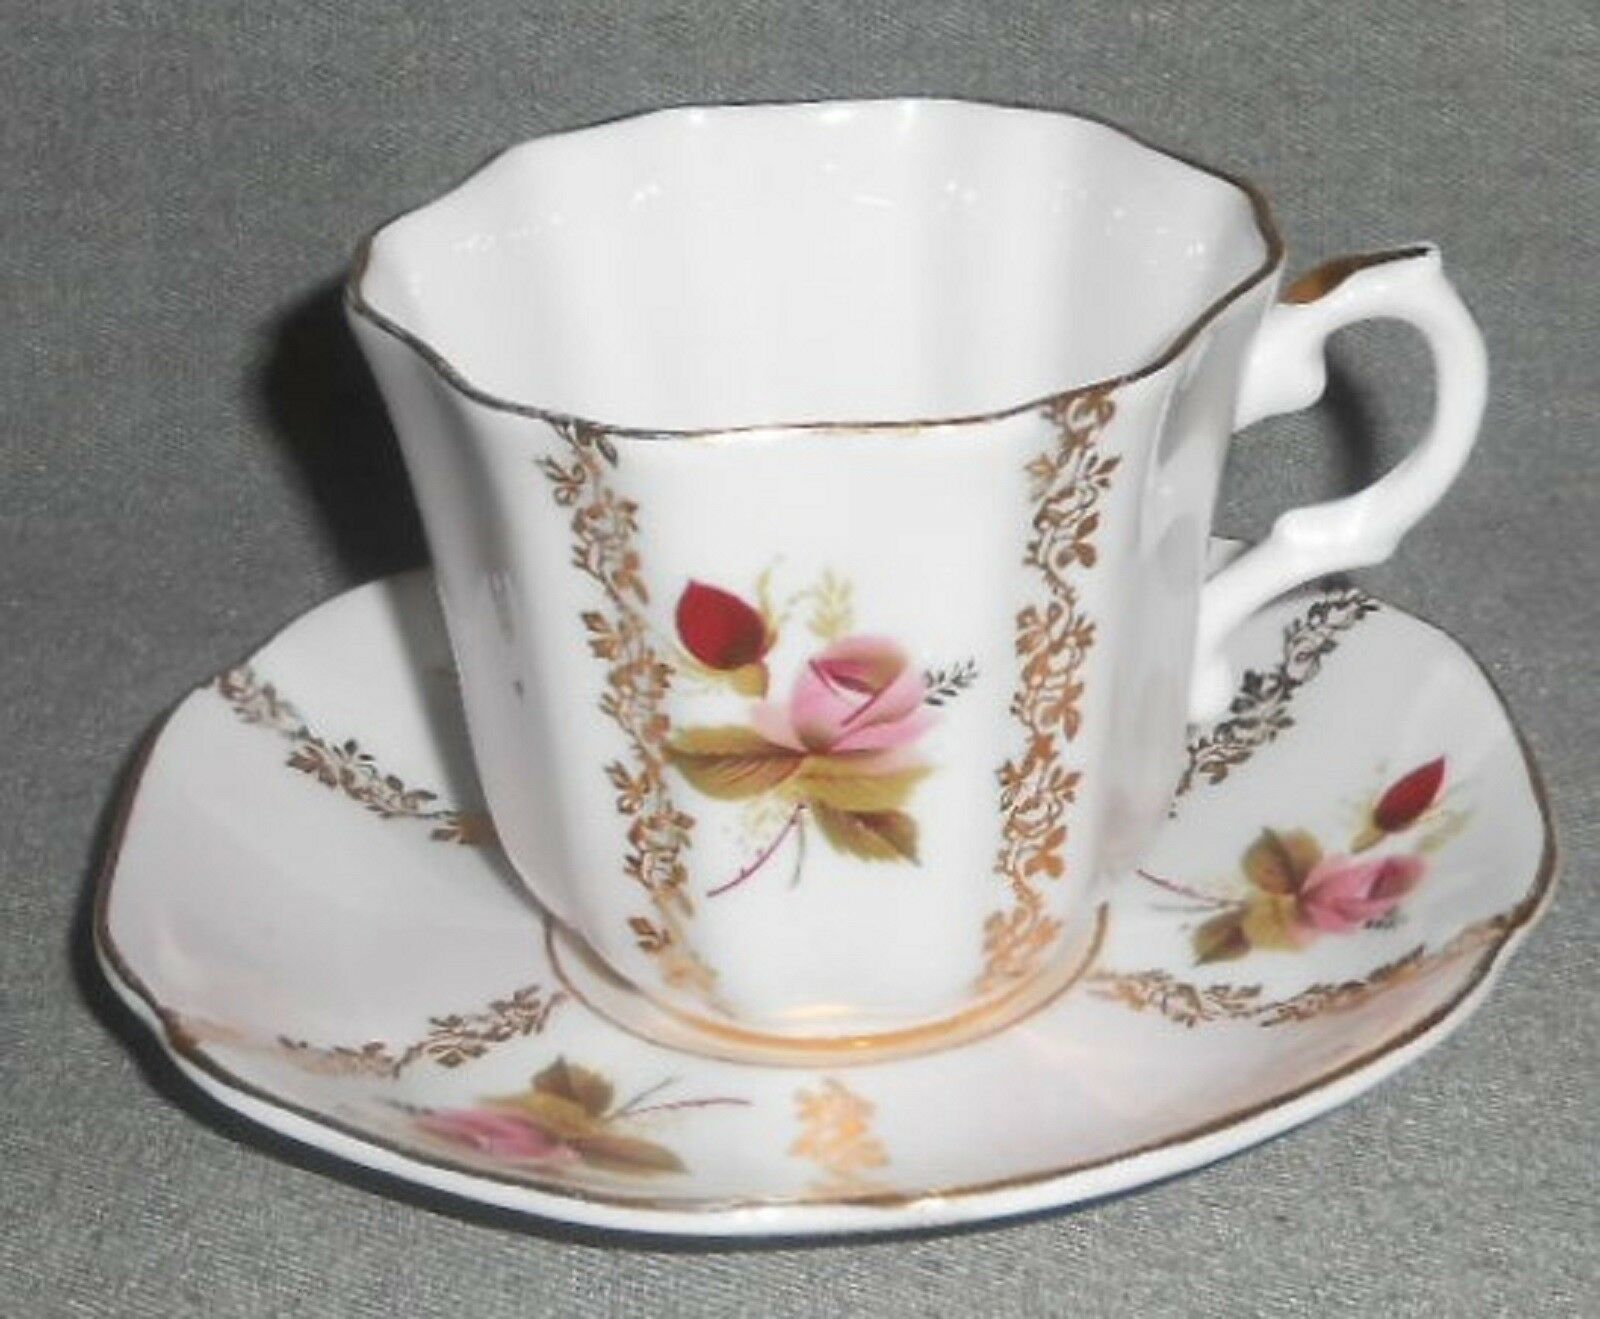 Primary image for 1950s/60s Royal Grafton PINK / RED ROSES MOTIF Bone China CUP SAUCER SET England